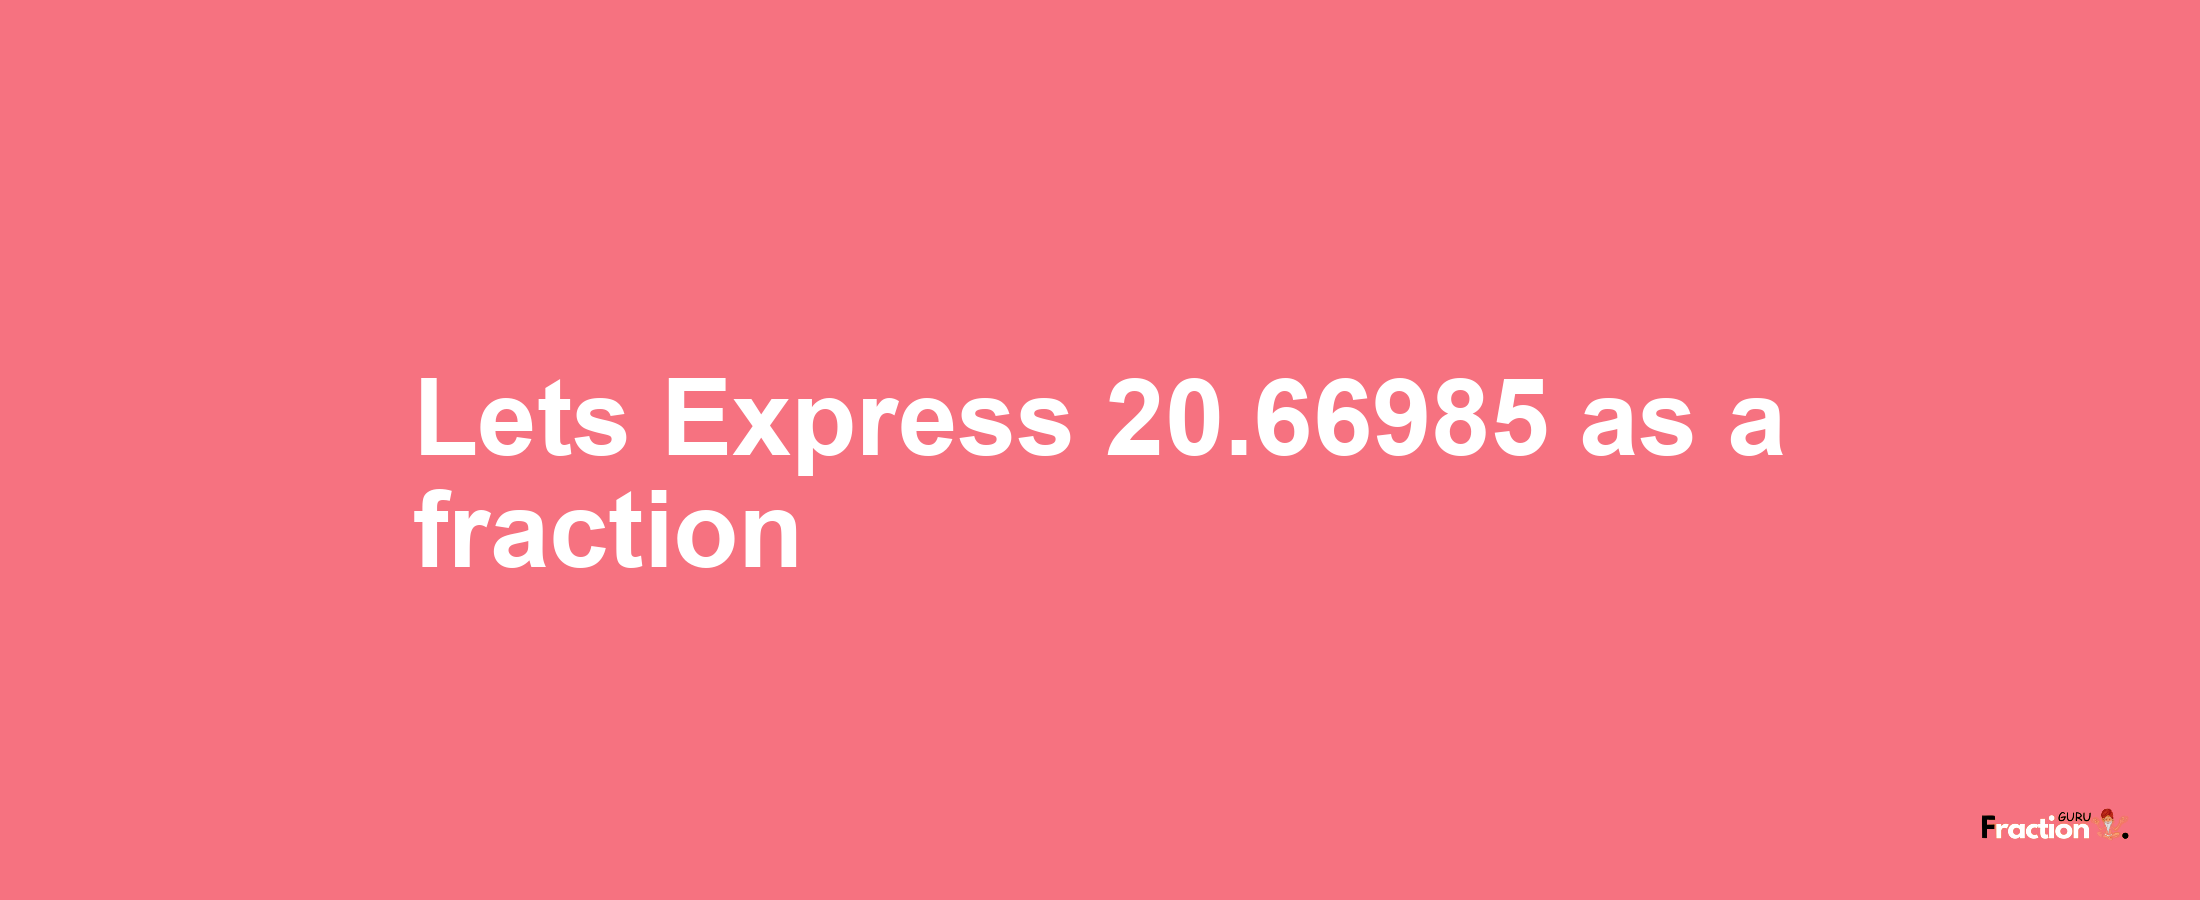 Lets Express 20.66985 as afraction